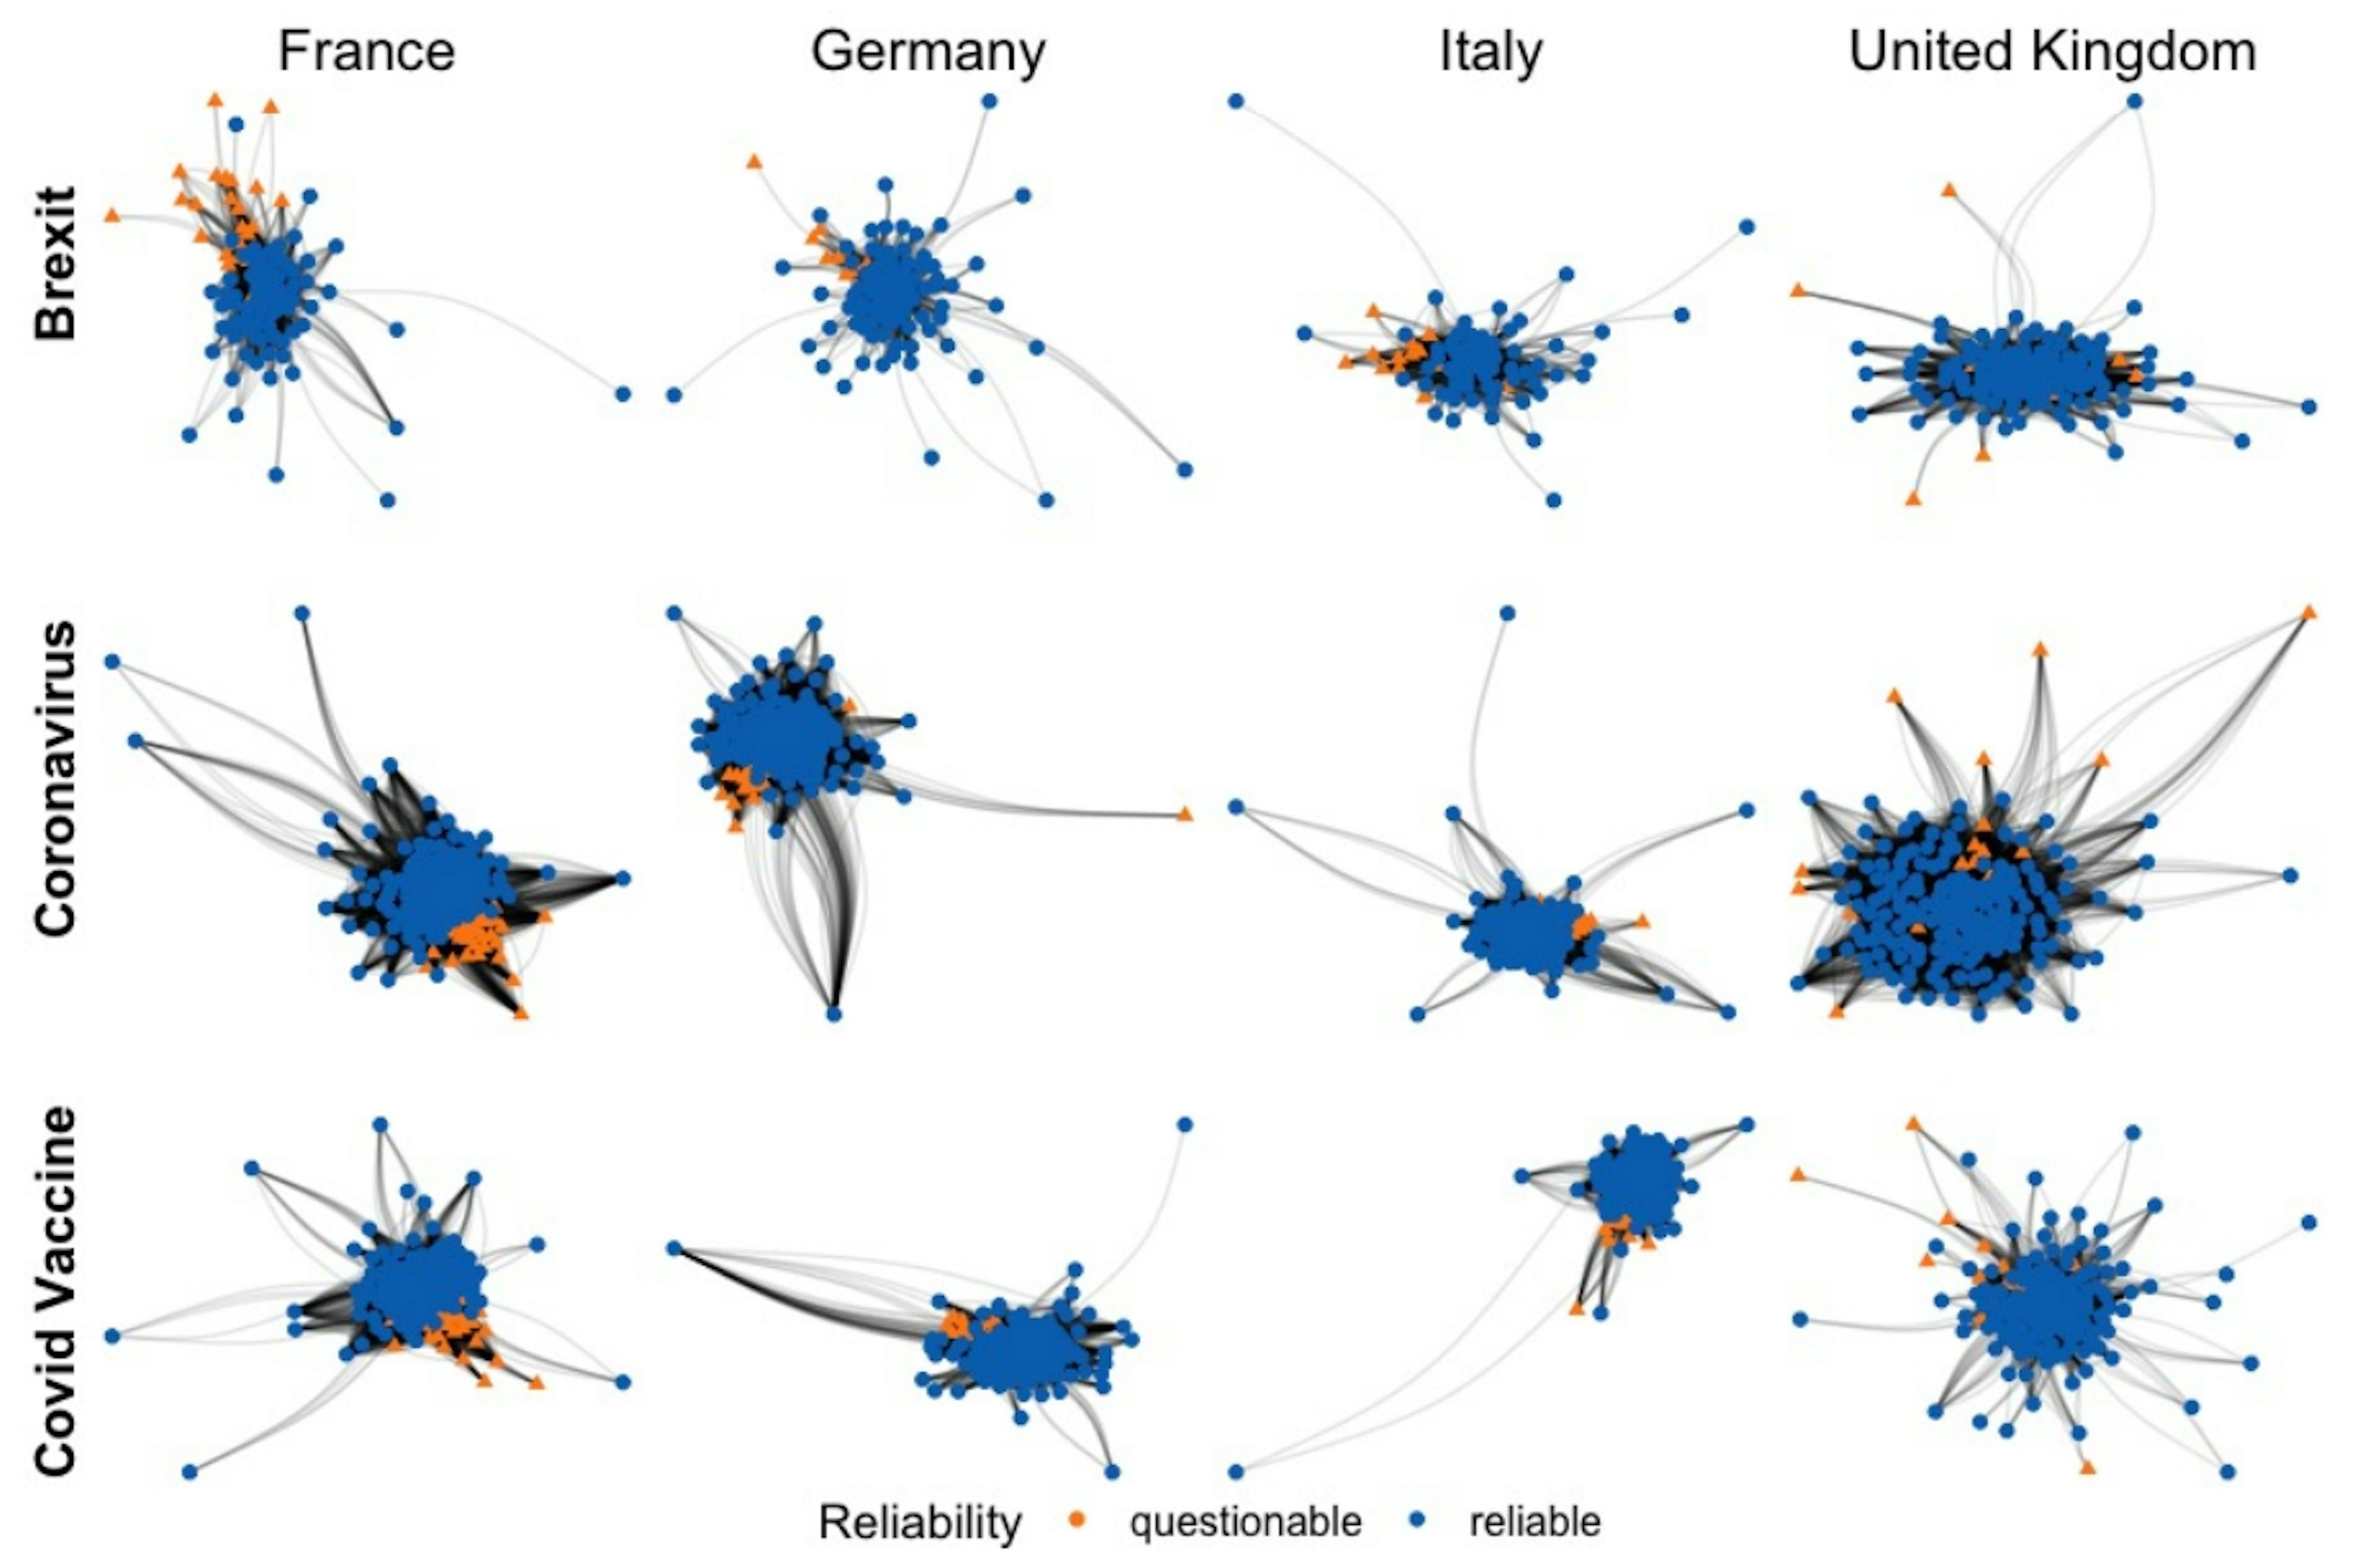 Figure 1: Similarity network among news outlets, where each news source is represented as a node, and edges represent audiences’ similarity among news outlets. The color and shape of the nodes indicate the classification of the news source, and the thickness of the edges represents the level of similarity of retweeters between two news sources. Each network represents the news outlets’ similarity on one topic for one country.